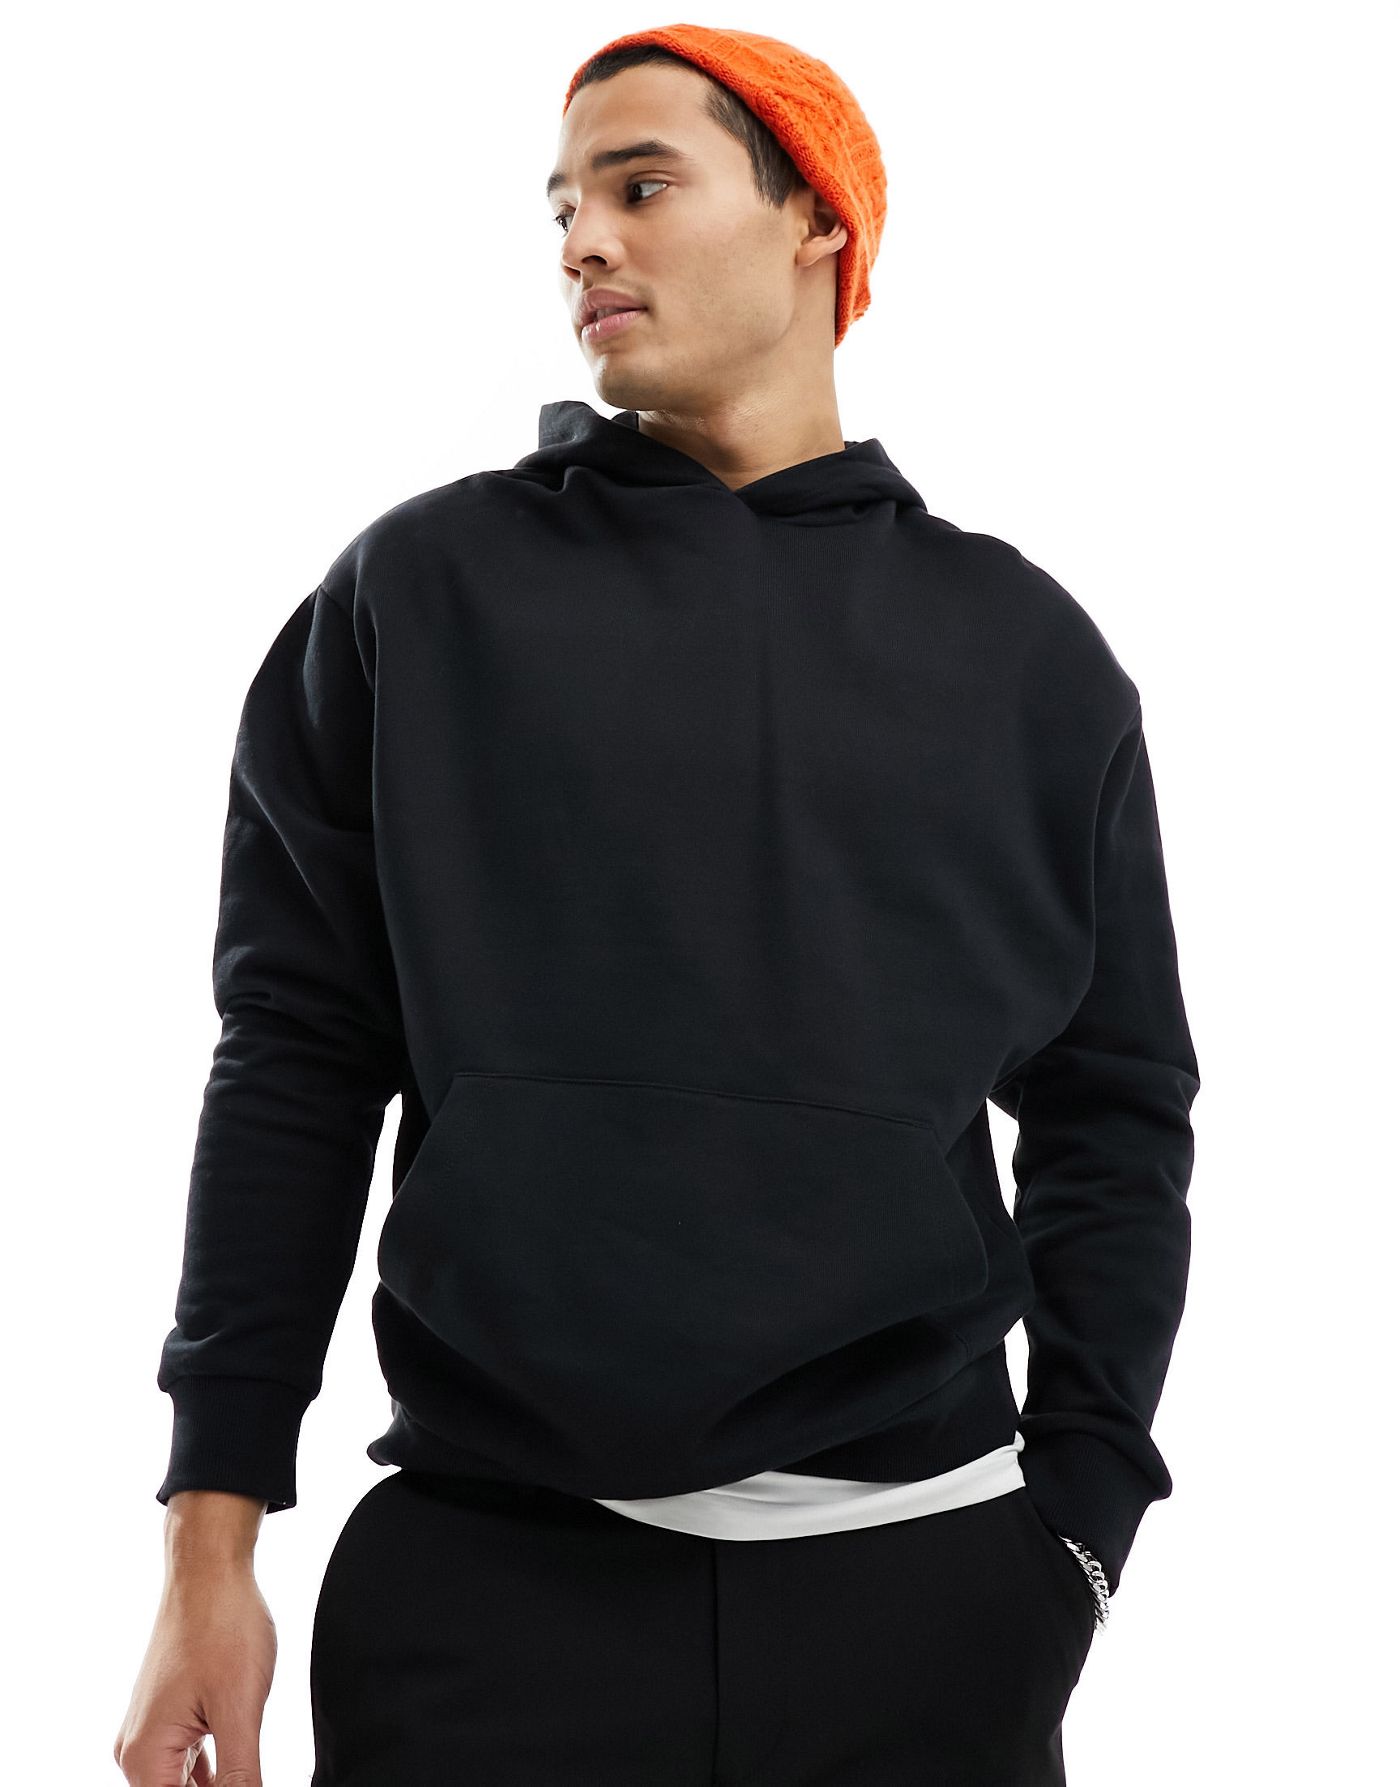 ASOS DESIGN oversized hoodie with large back print and hood embroidery in black